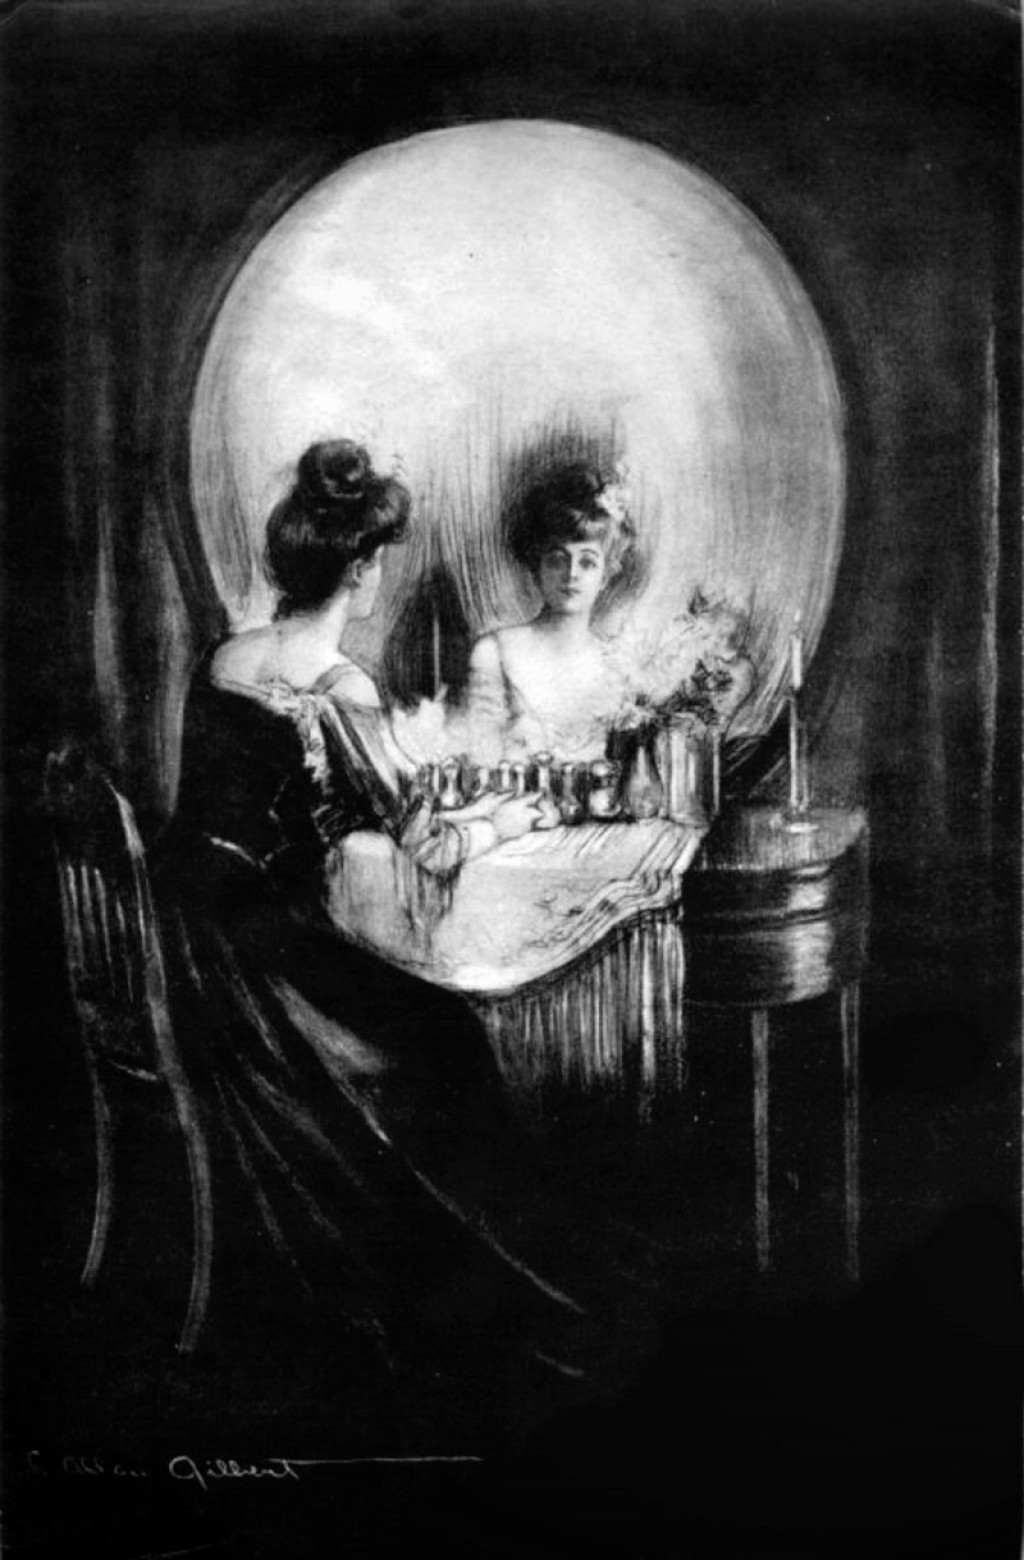 All is Vanity by Charles Allan Gilbert - 1892 - - private collection